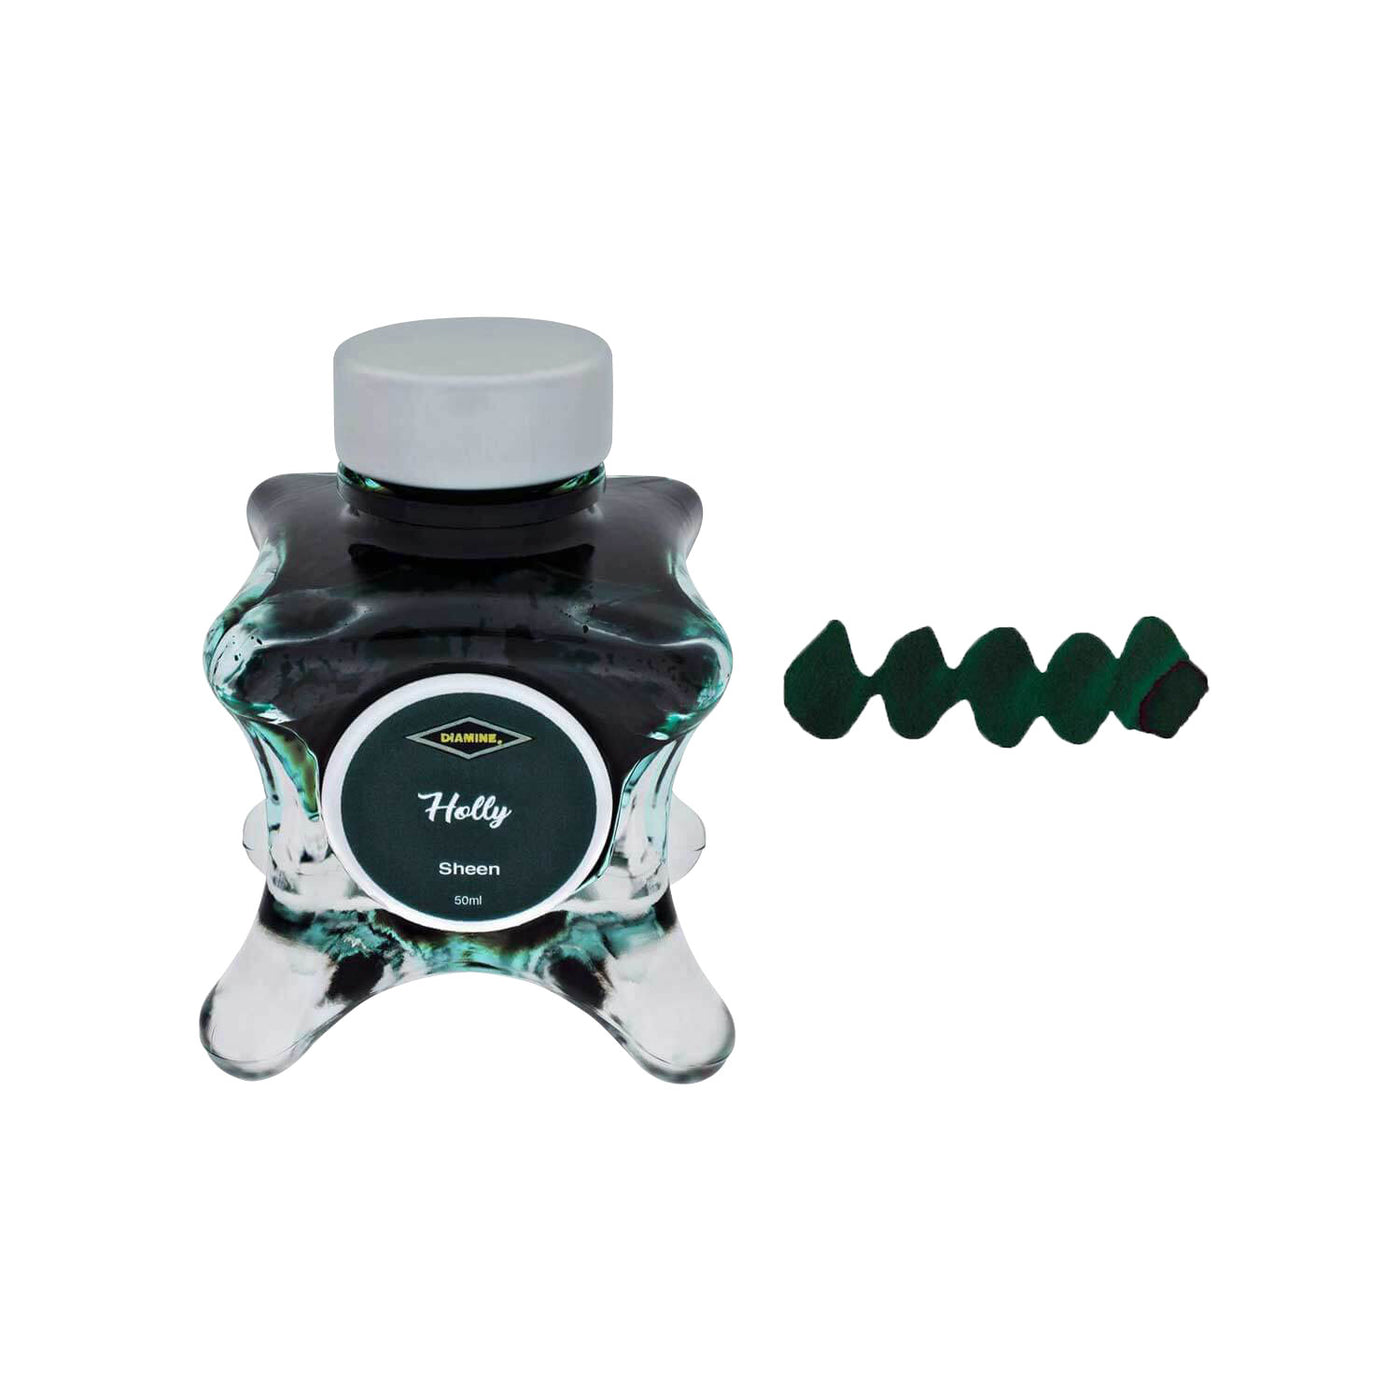 Diamine Inkvent Blue Edition Ink Bottle, Holy (Green) - 50ml